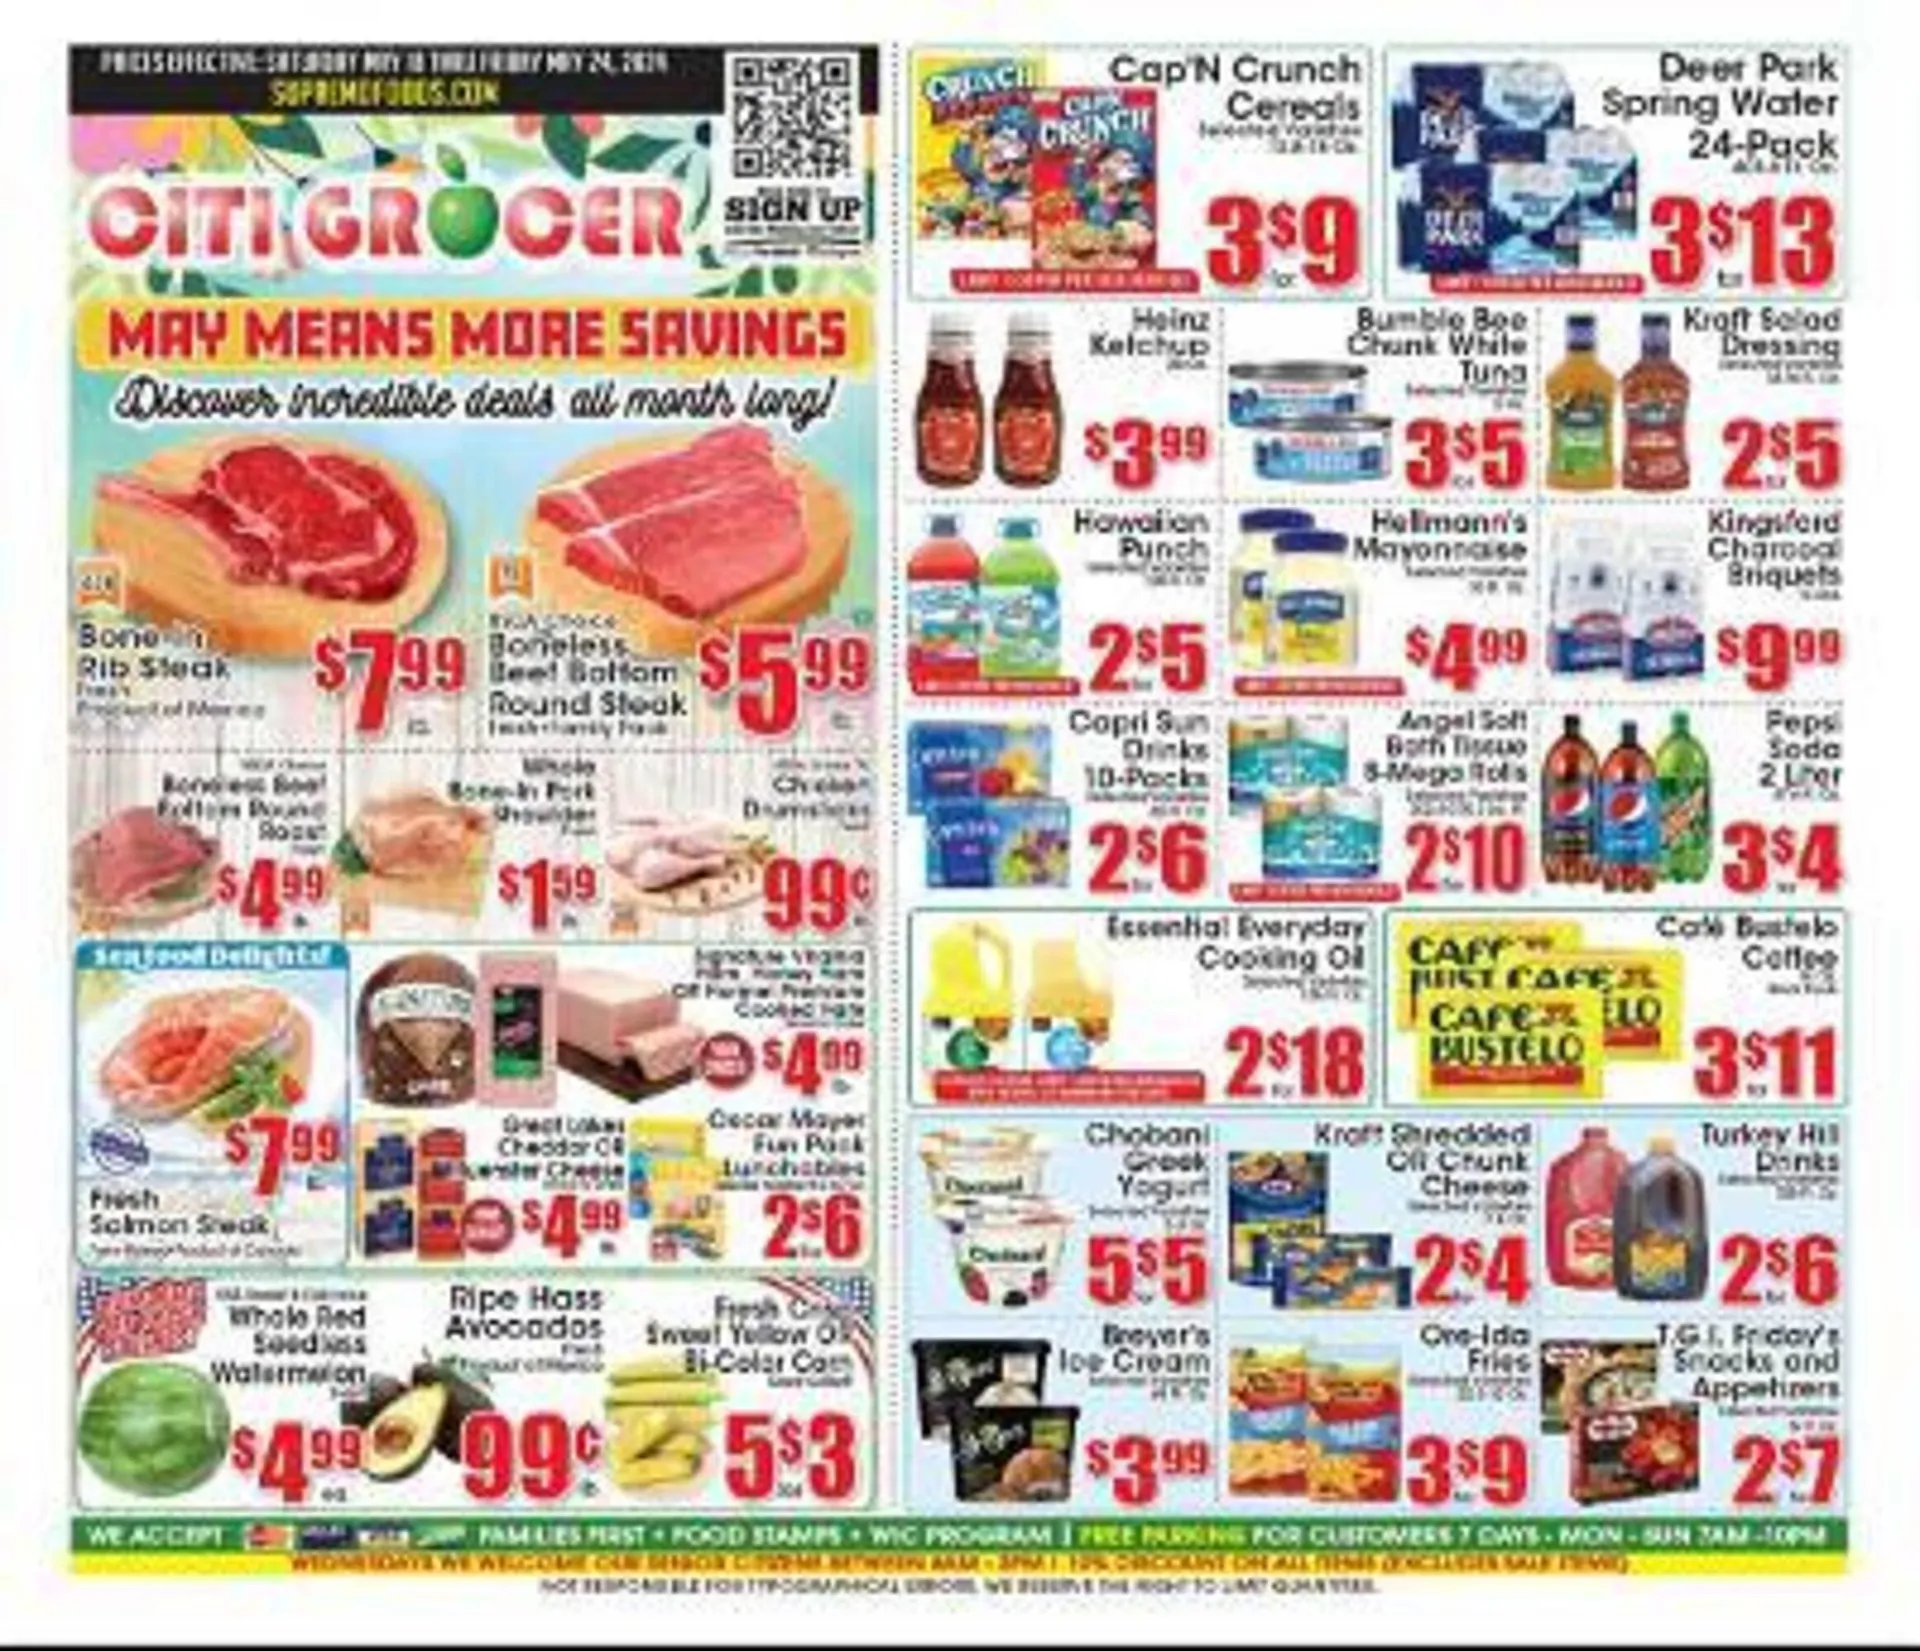 Supremo Foods Inc Weekly Ad - 1